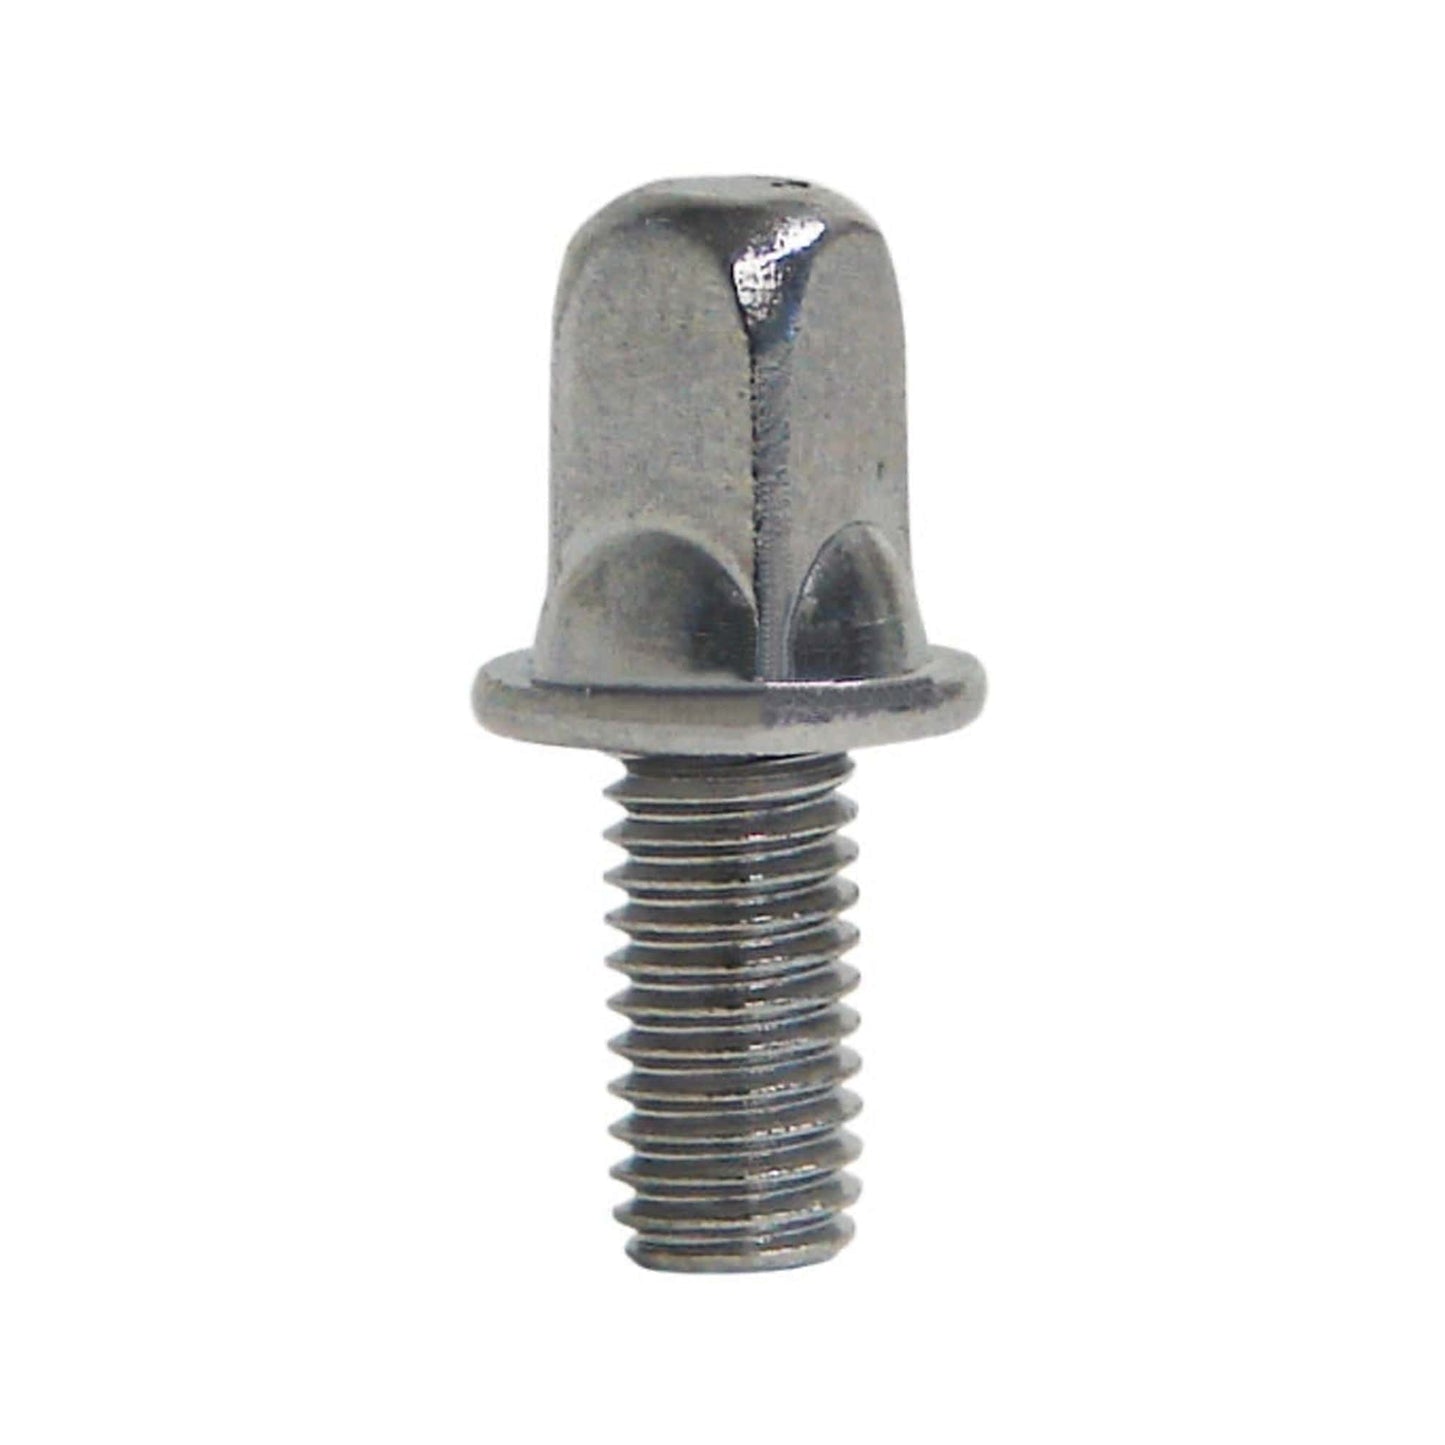 Pearl Key Bolt for Snare Drum Throw Off Drums and Percussion / Parts and Accessories / Drum Parts